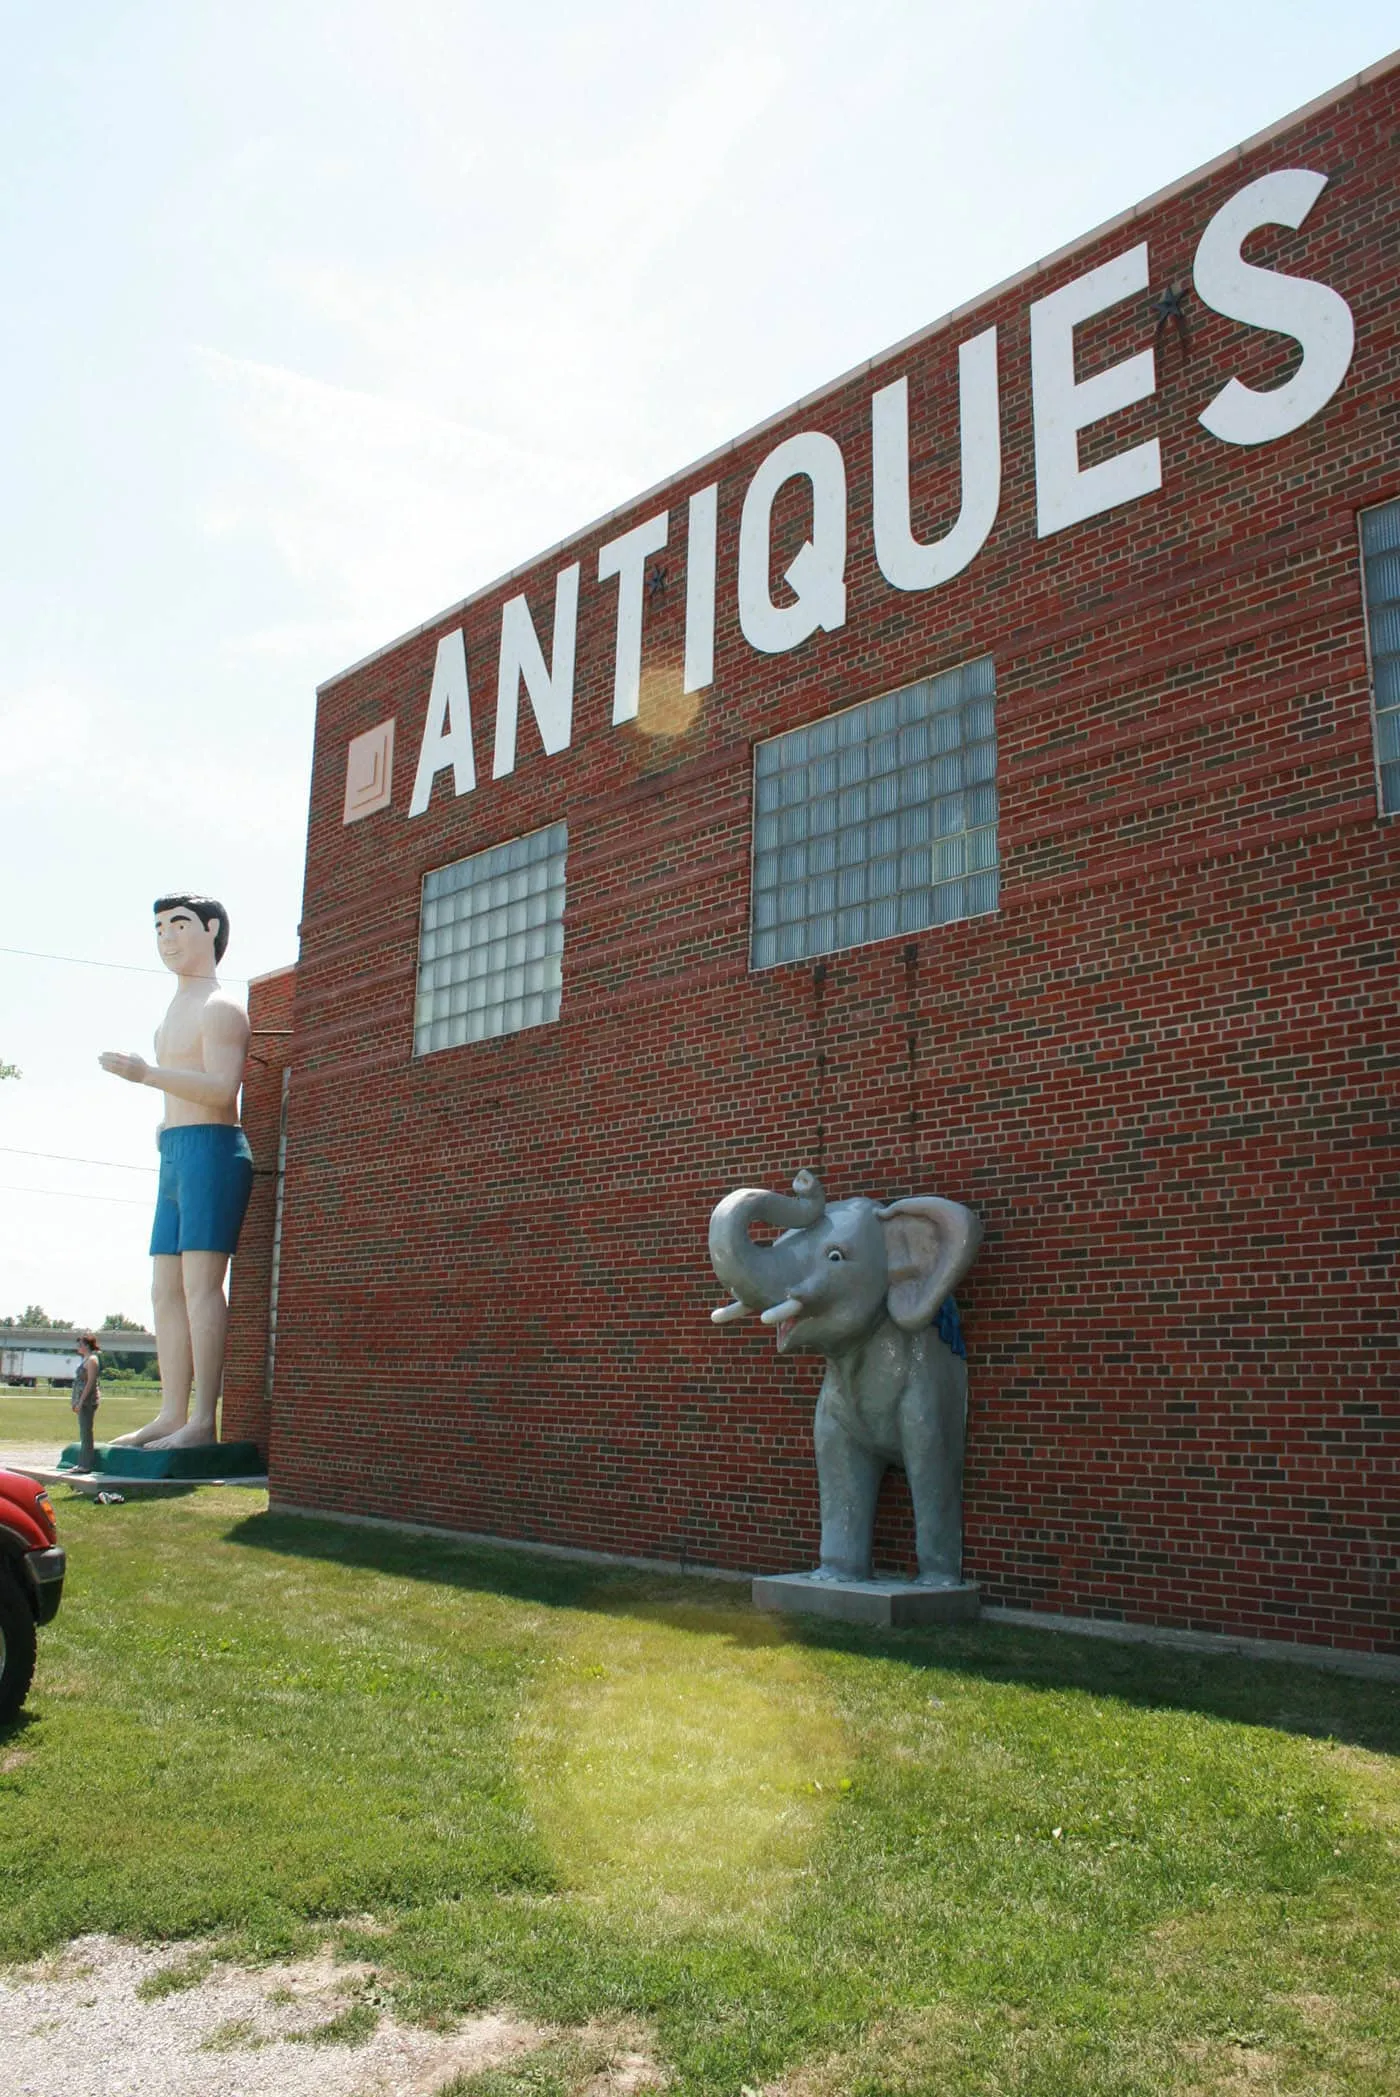 Giant Beach Guy and fiberglass elephant  - roadside attractions at Pink Elephant Antique Mall in Livingston, Illinois